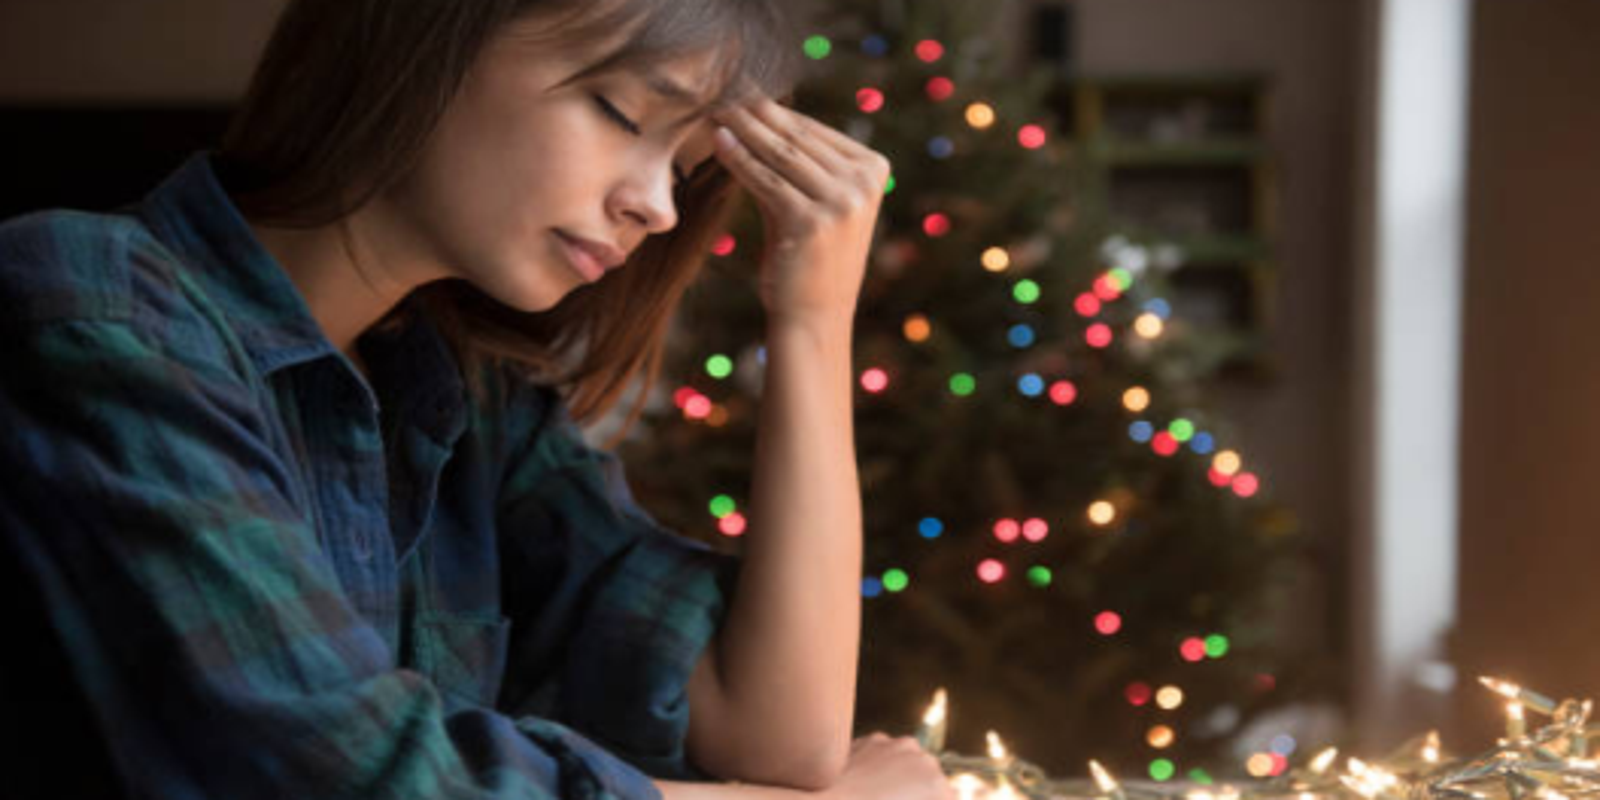 COVID-19 stress isn't taking a break for the holidays: How experts say you should cope